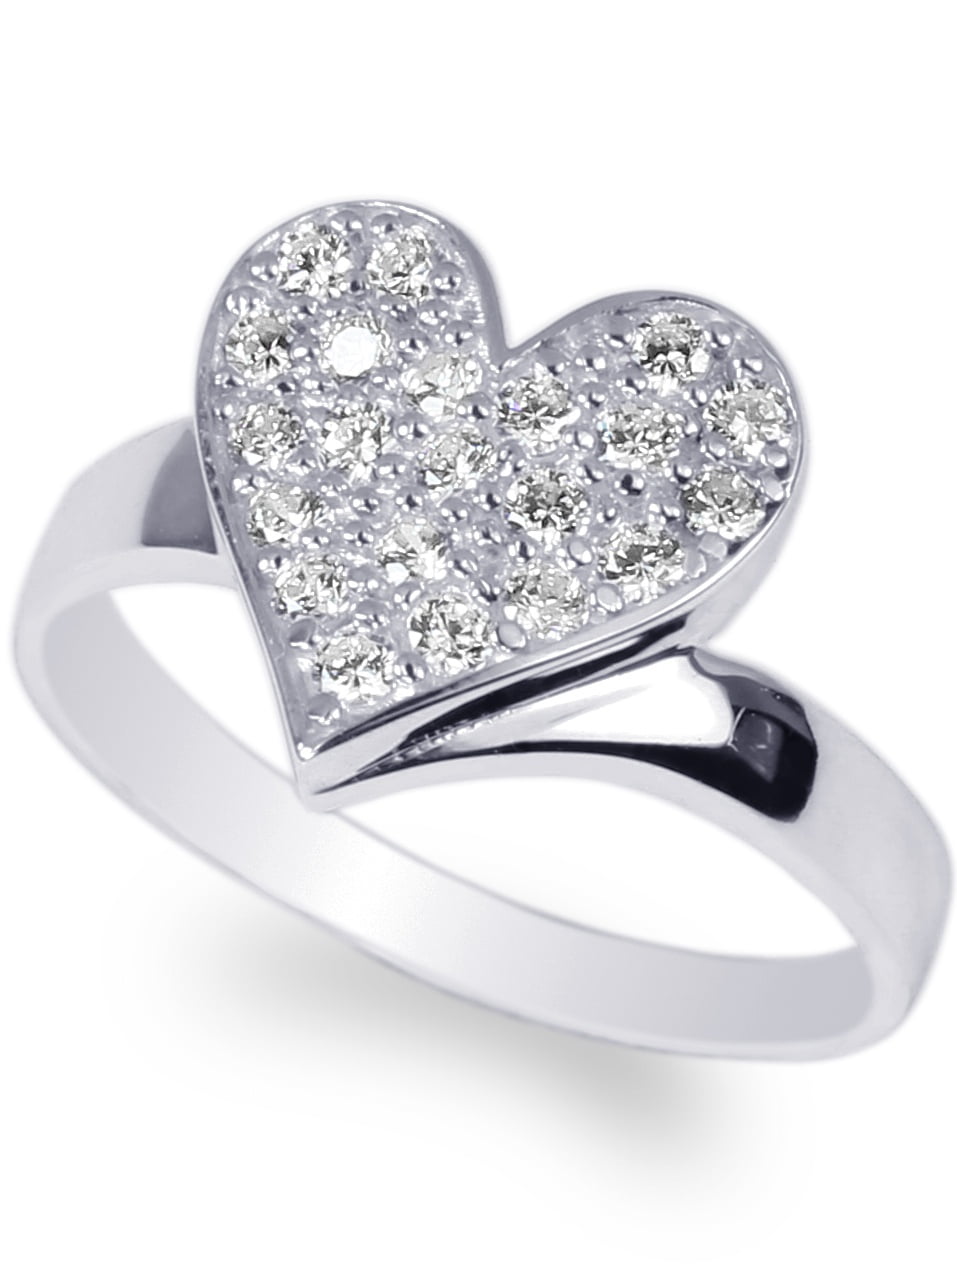 Details about   925 Sterling Silver Heart Shaped Luxury Solid Ring with Round CZ Embedded Size 4